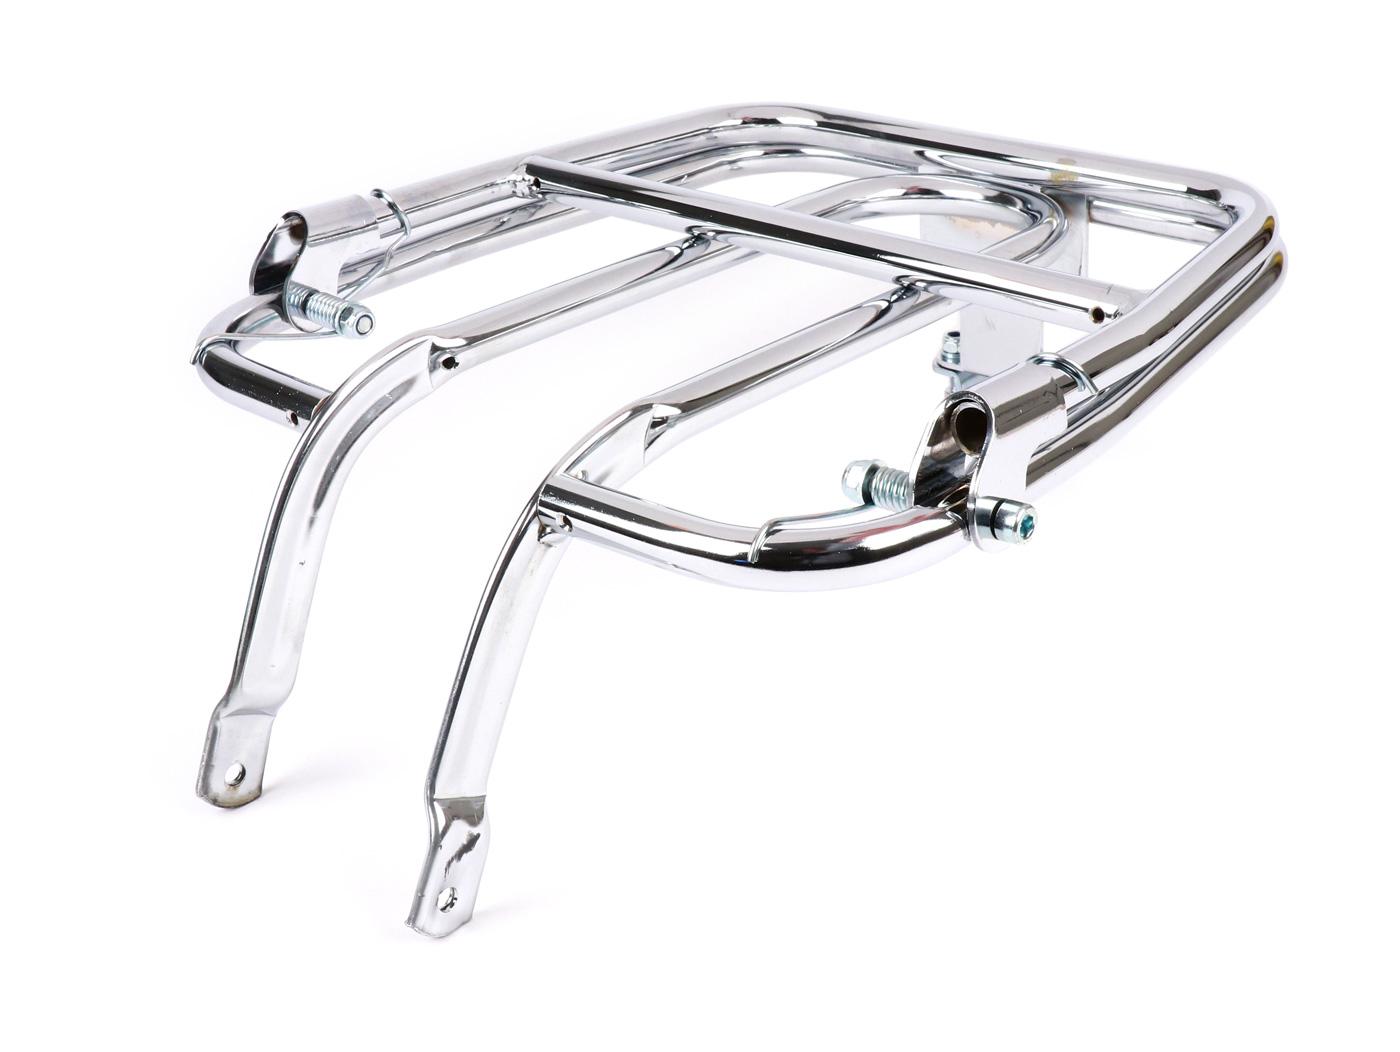 Chrome front luggage rack for Ciao